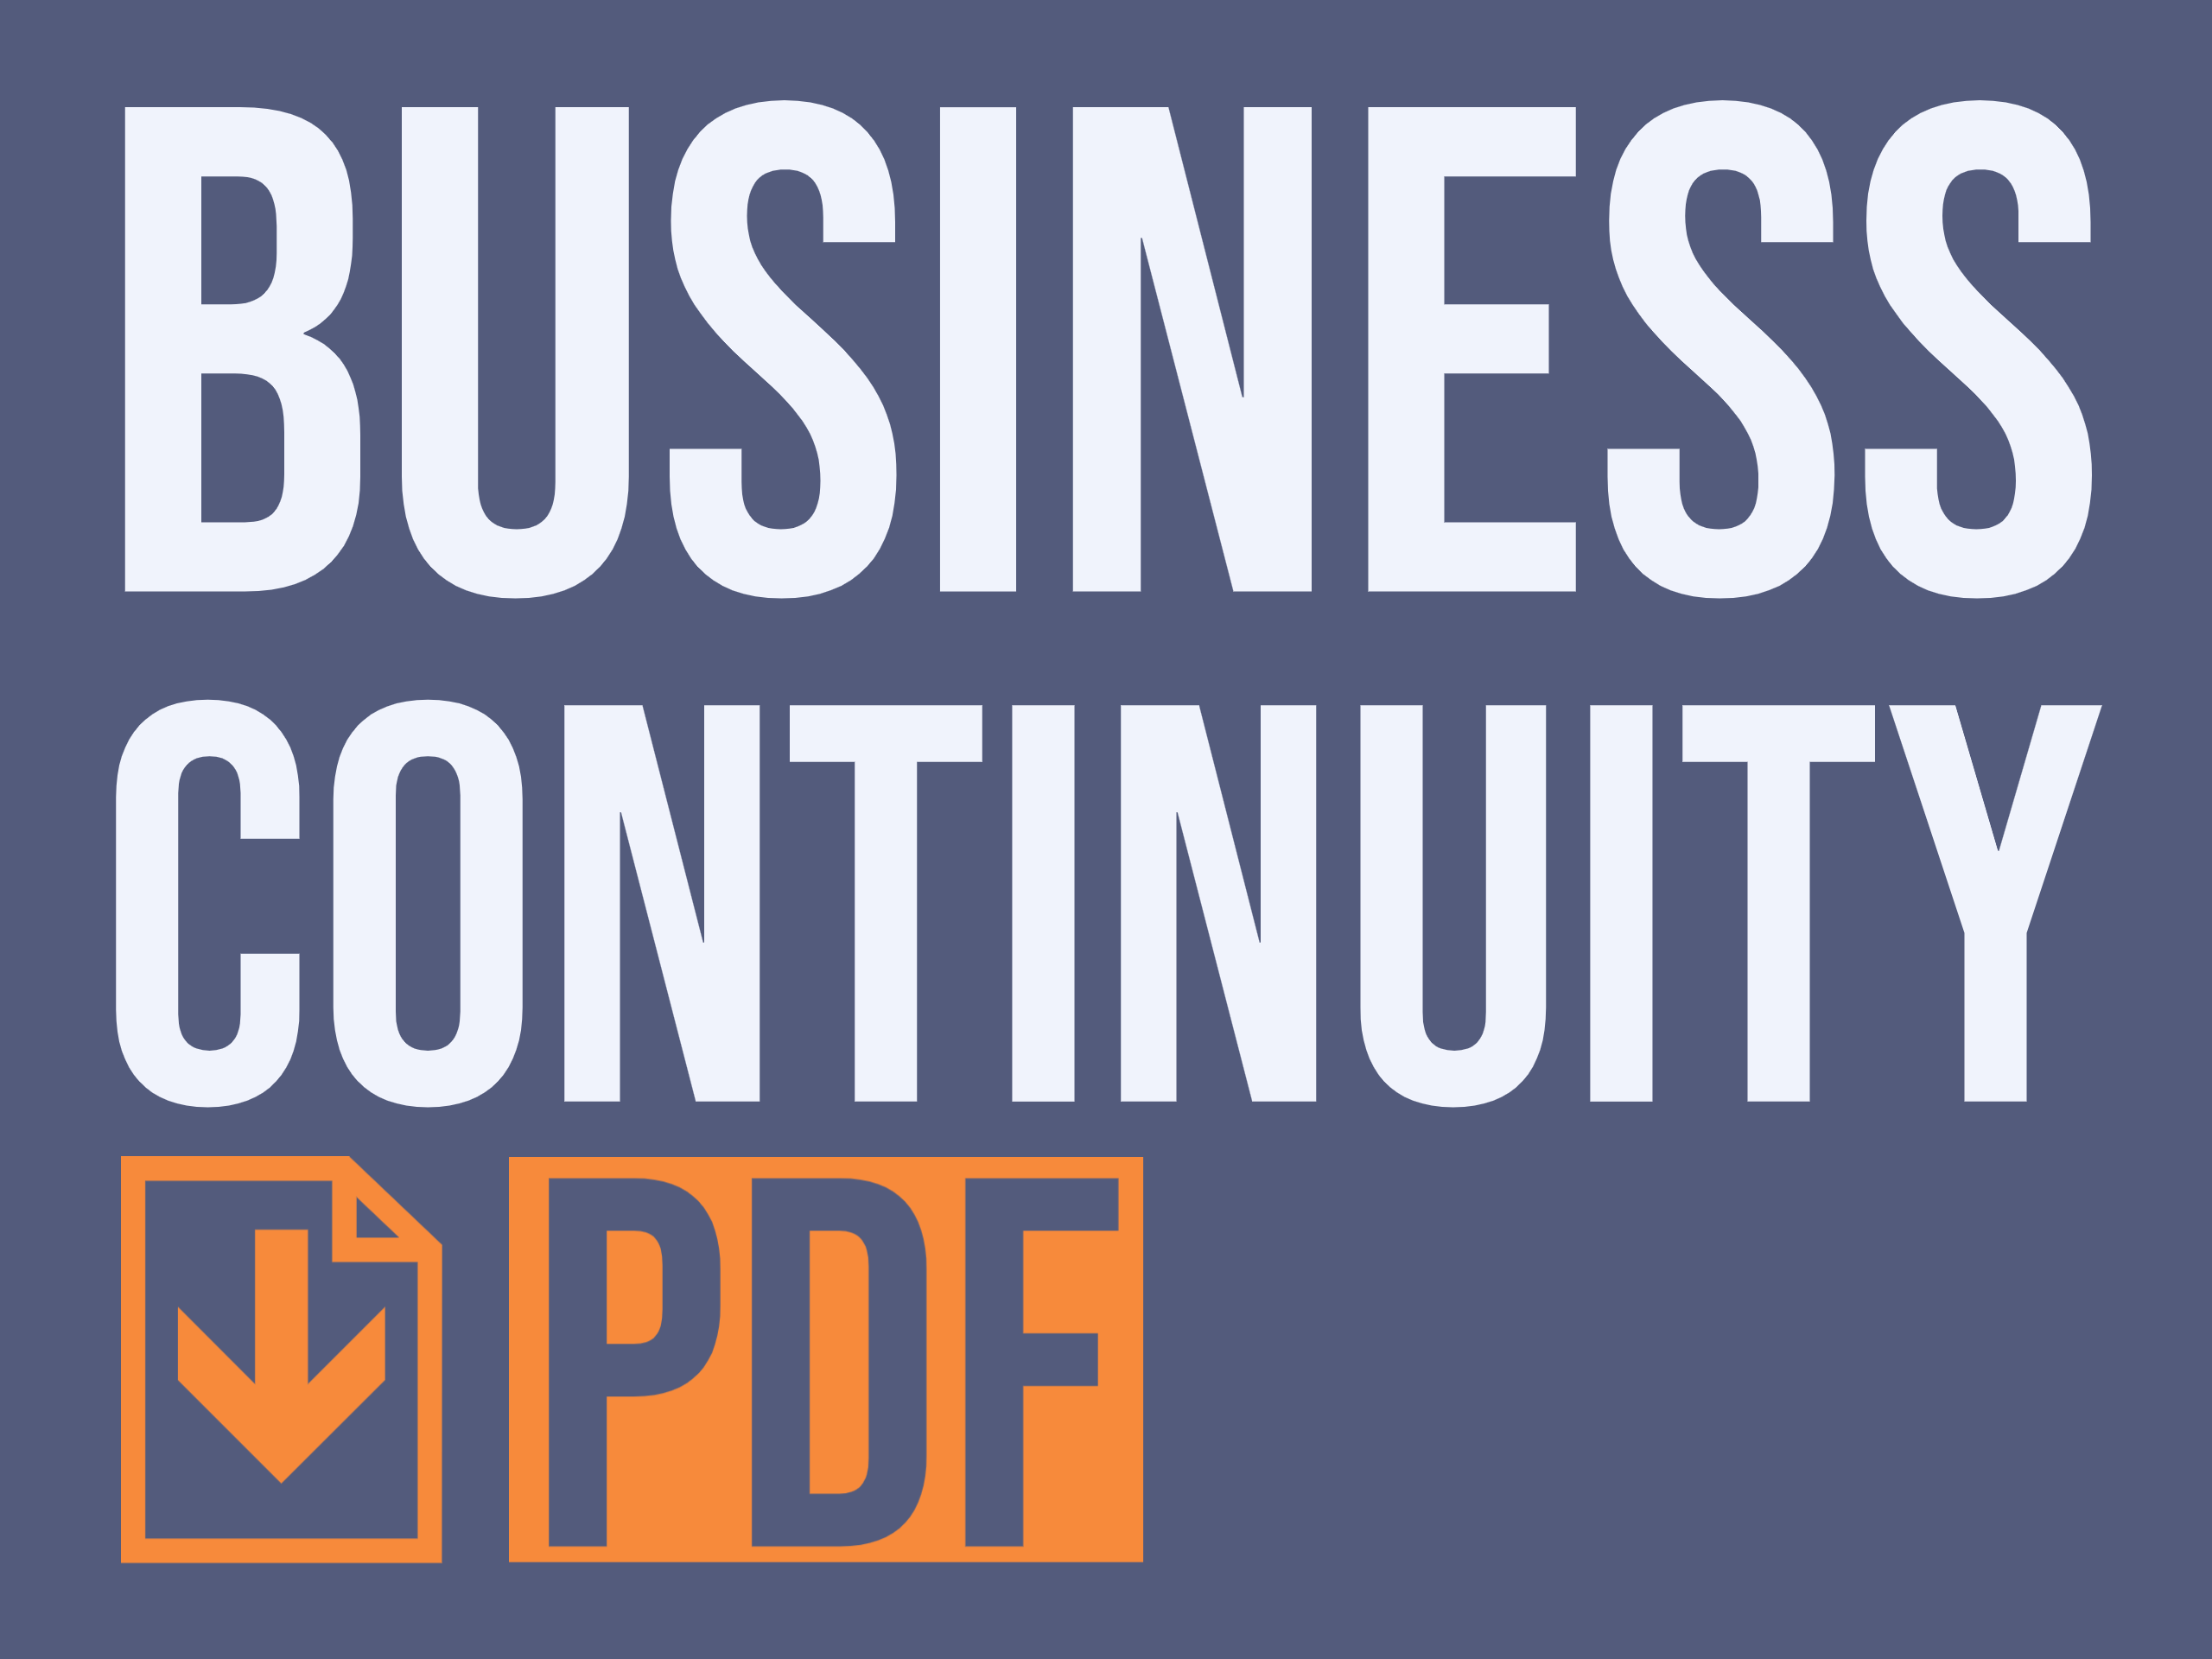 Business continuity template. Incorporate as an SOP or assignment instruction for when disaster strikes.